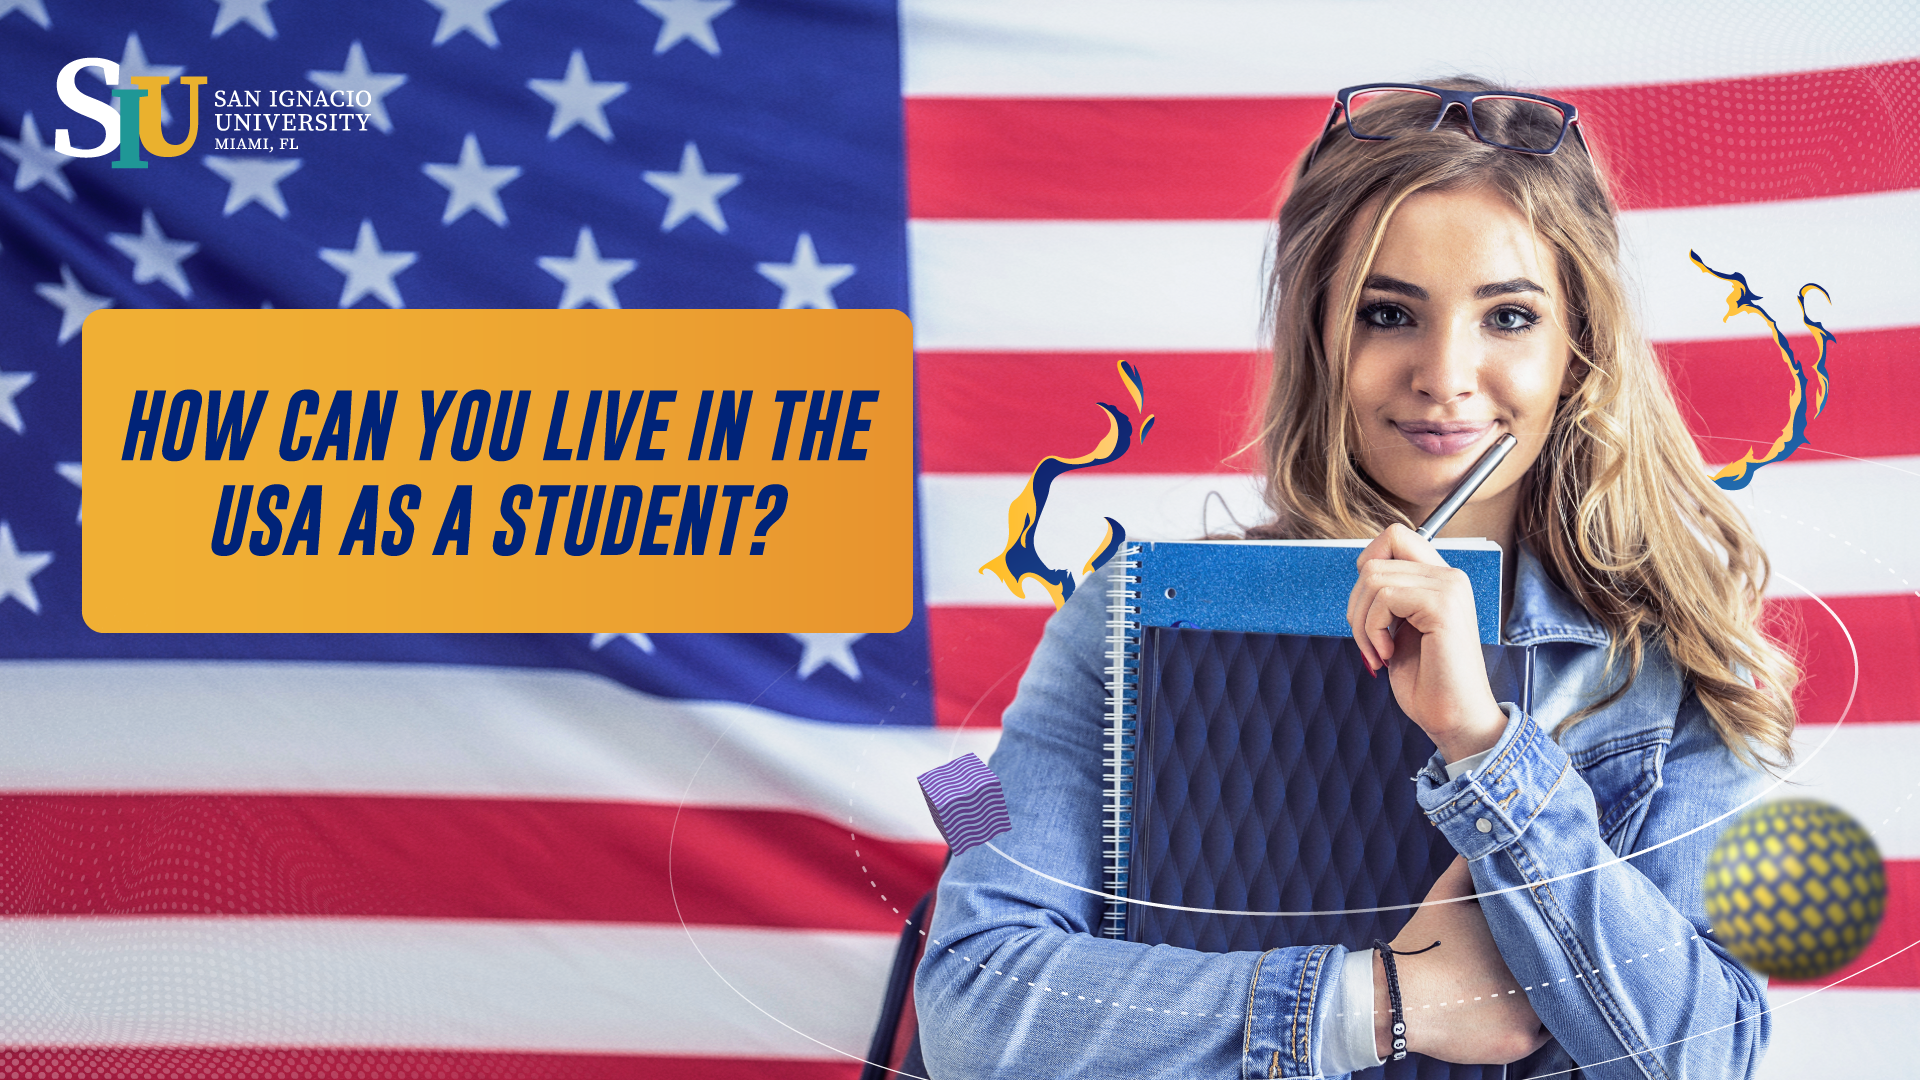 How can you live in the USA as a student?